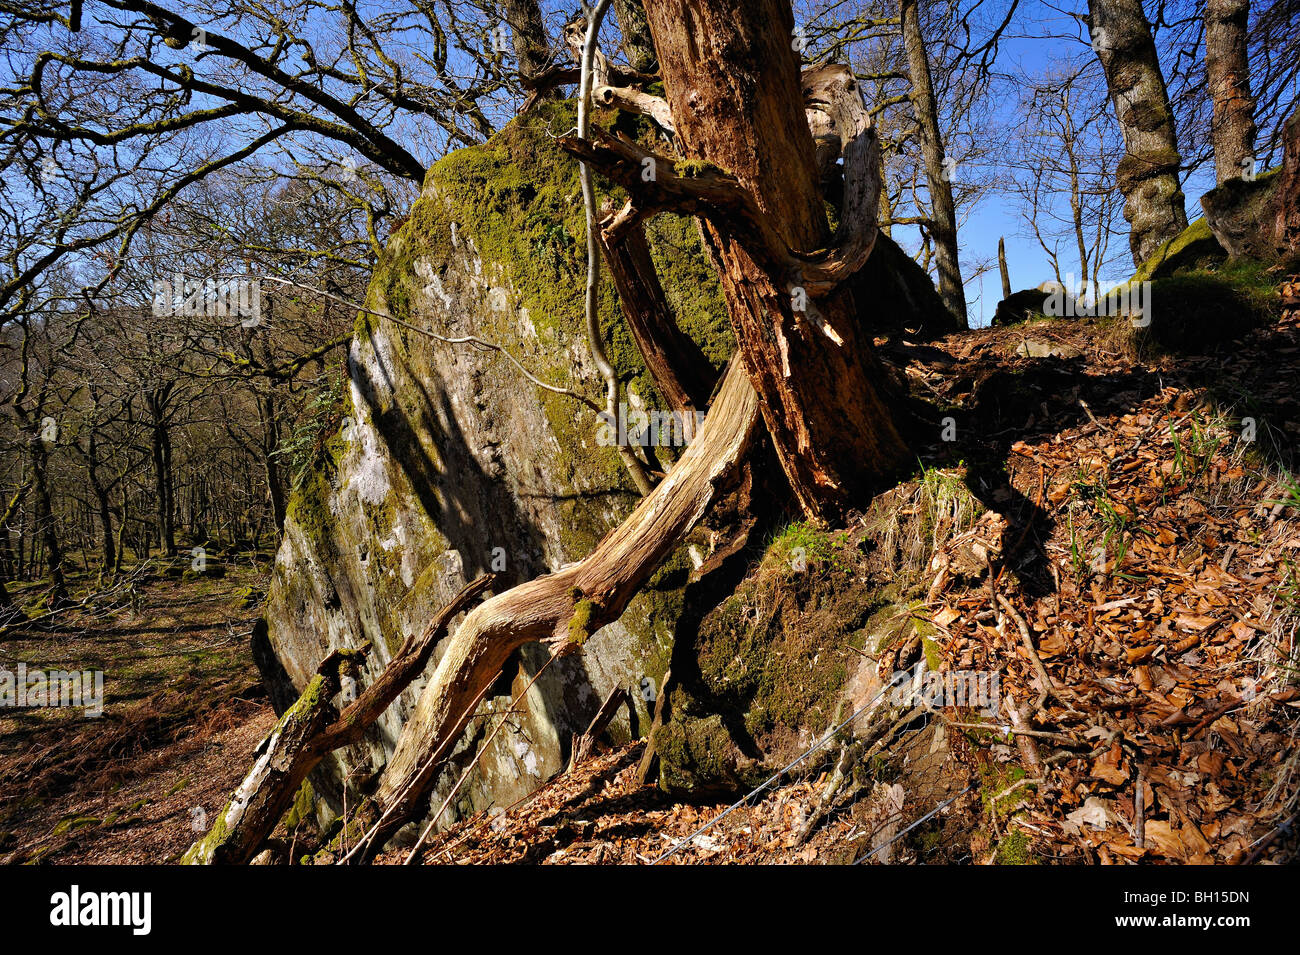 A decaying tree with fallen branches grows from a large boulder in woods near Killin, Perthshire, Scotland, UK Stock Photo